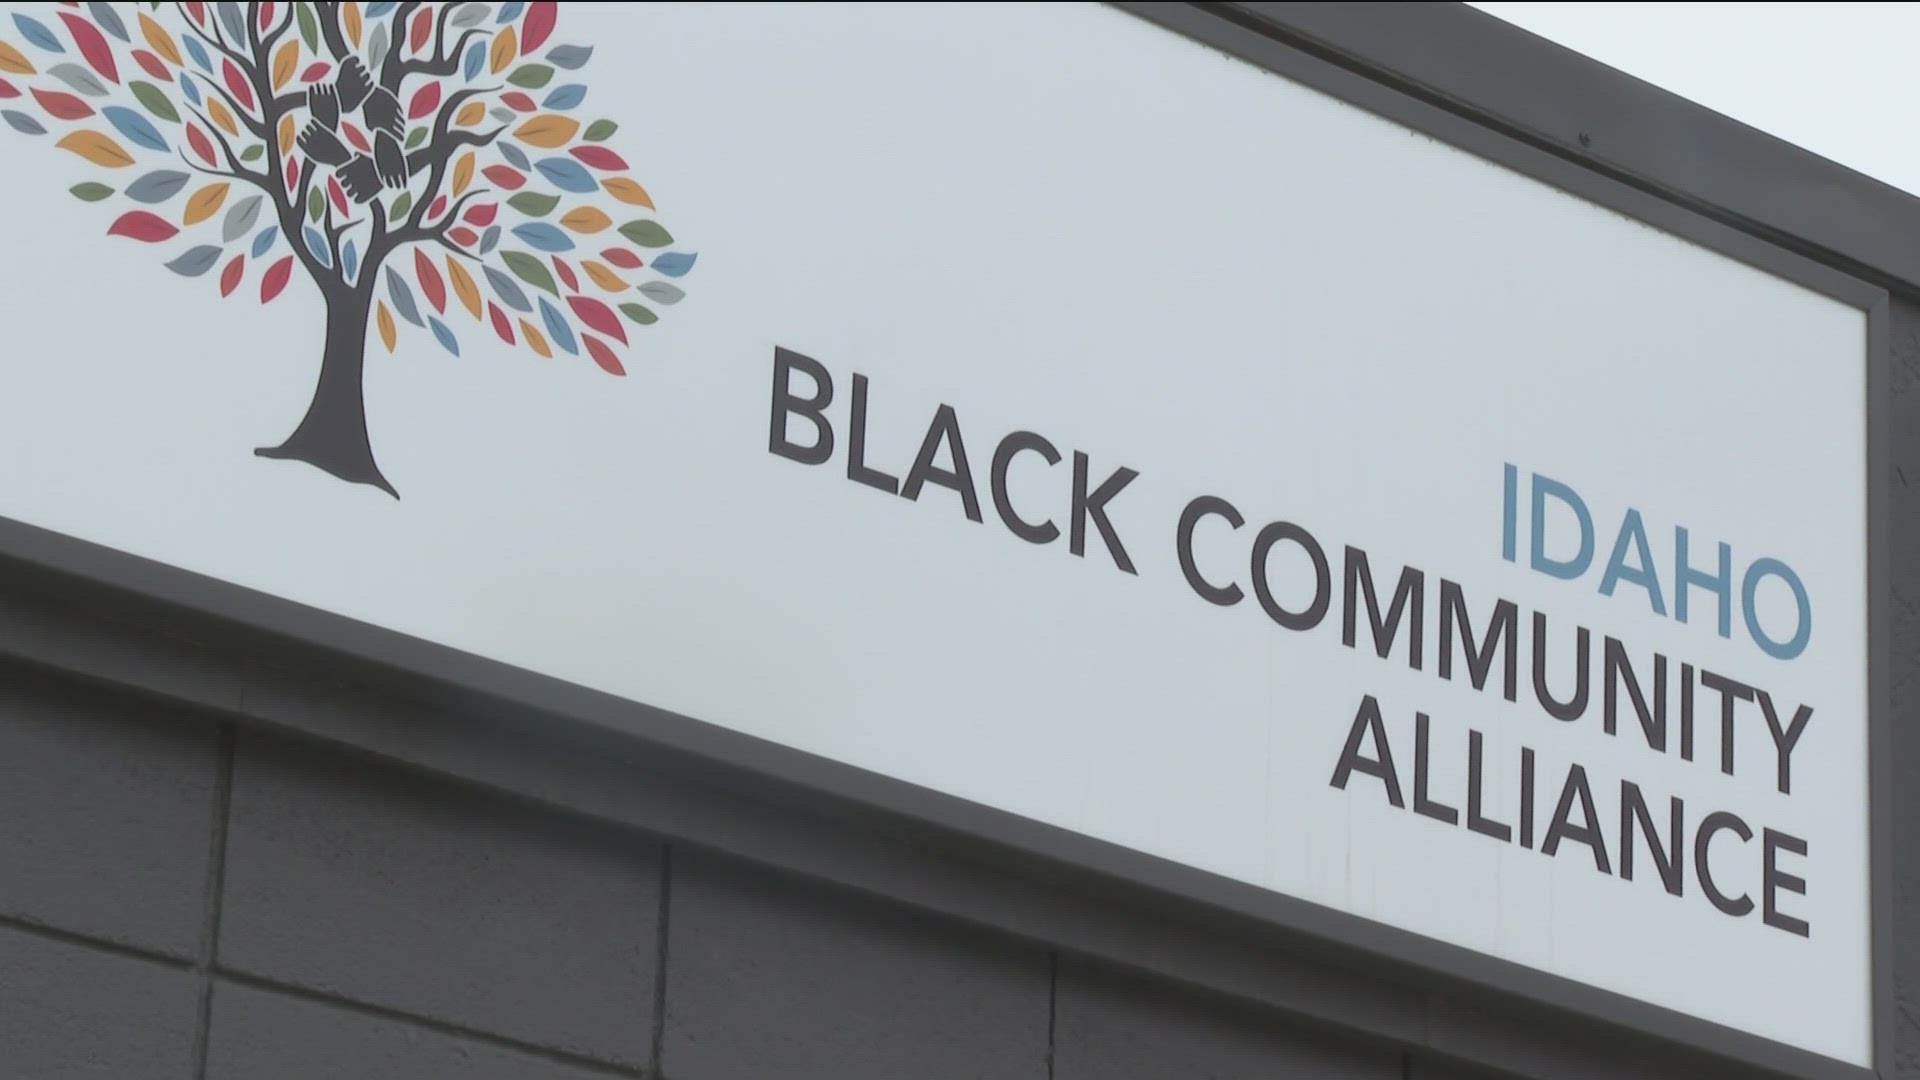 The Idaho Black Community Alliance has delivered on their mission helping almost 200 Black-owned businesses across Idaho overcome unique hurdles.